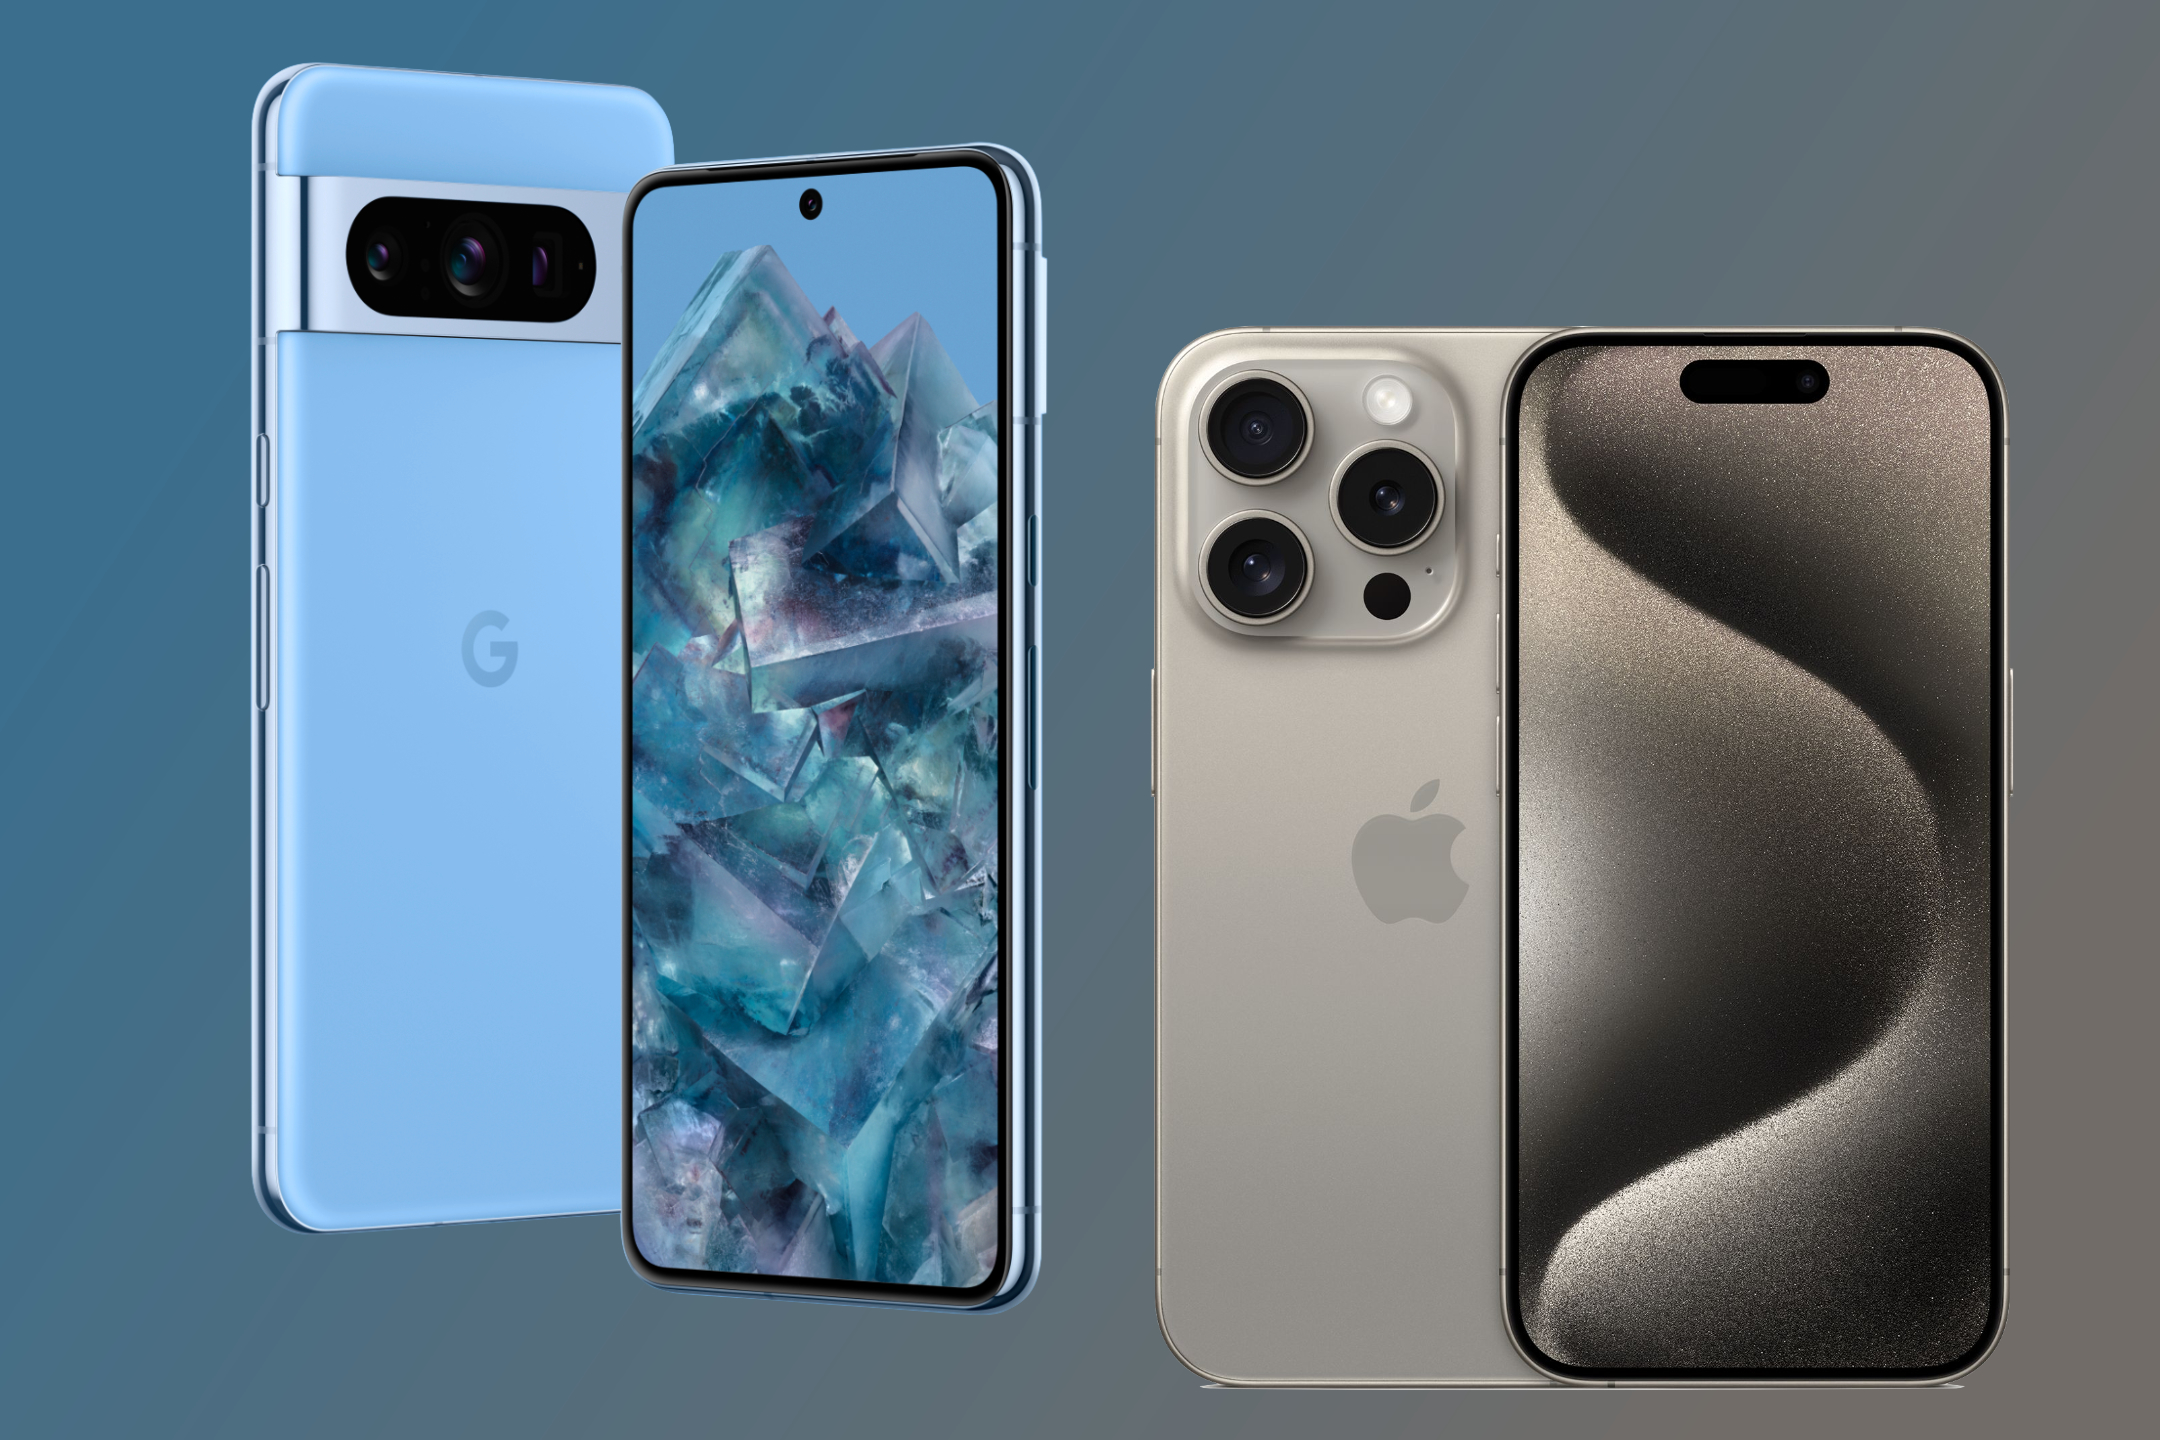 Renders of the Google Pixel 8 Pro and iPhone 15 Pro.